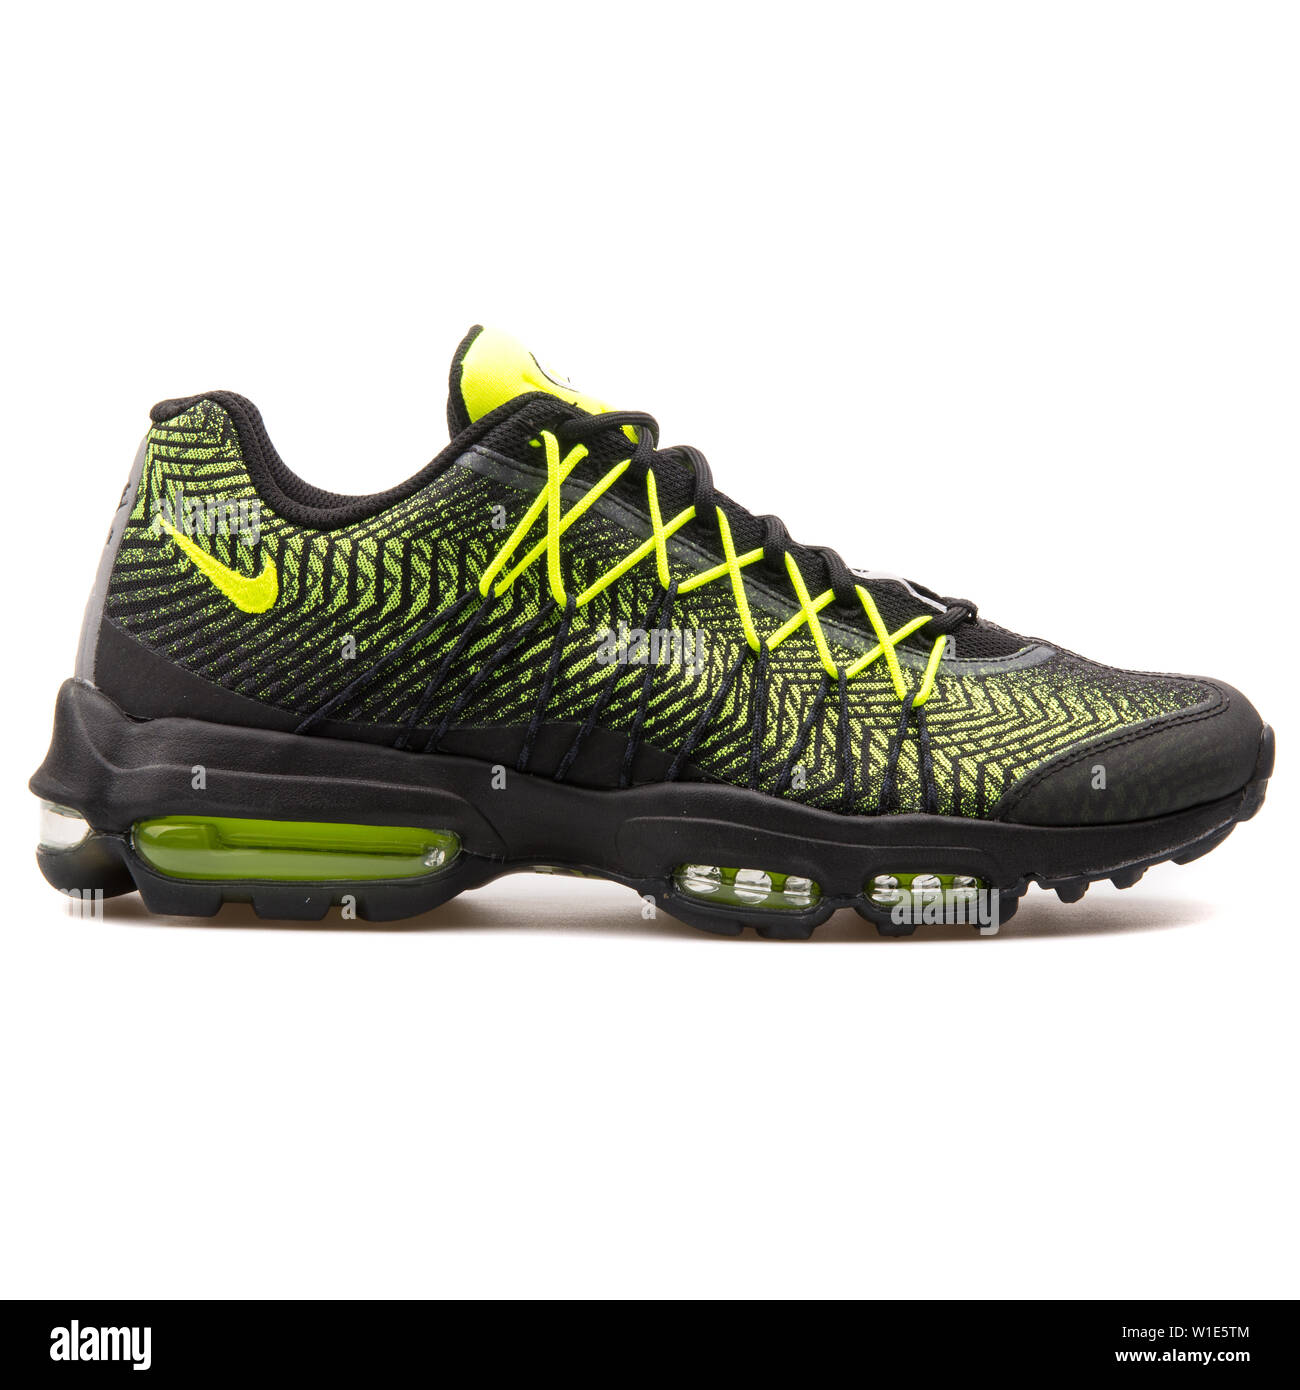 VIENNA, AUSTRIA - AUGUST 25, 2017: Nike Air Max 95 Ultra JCRD black and volt green background Stock Photo - Alamy